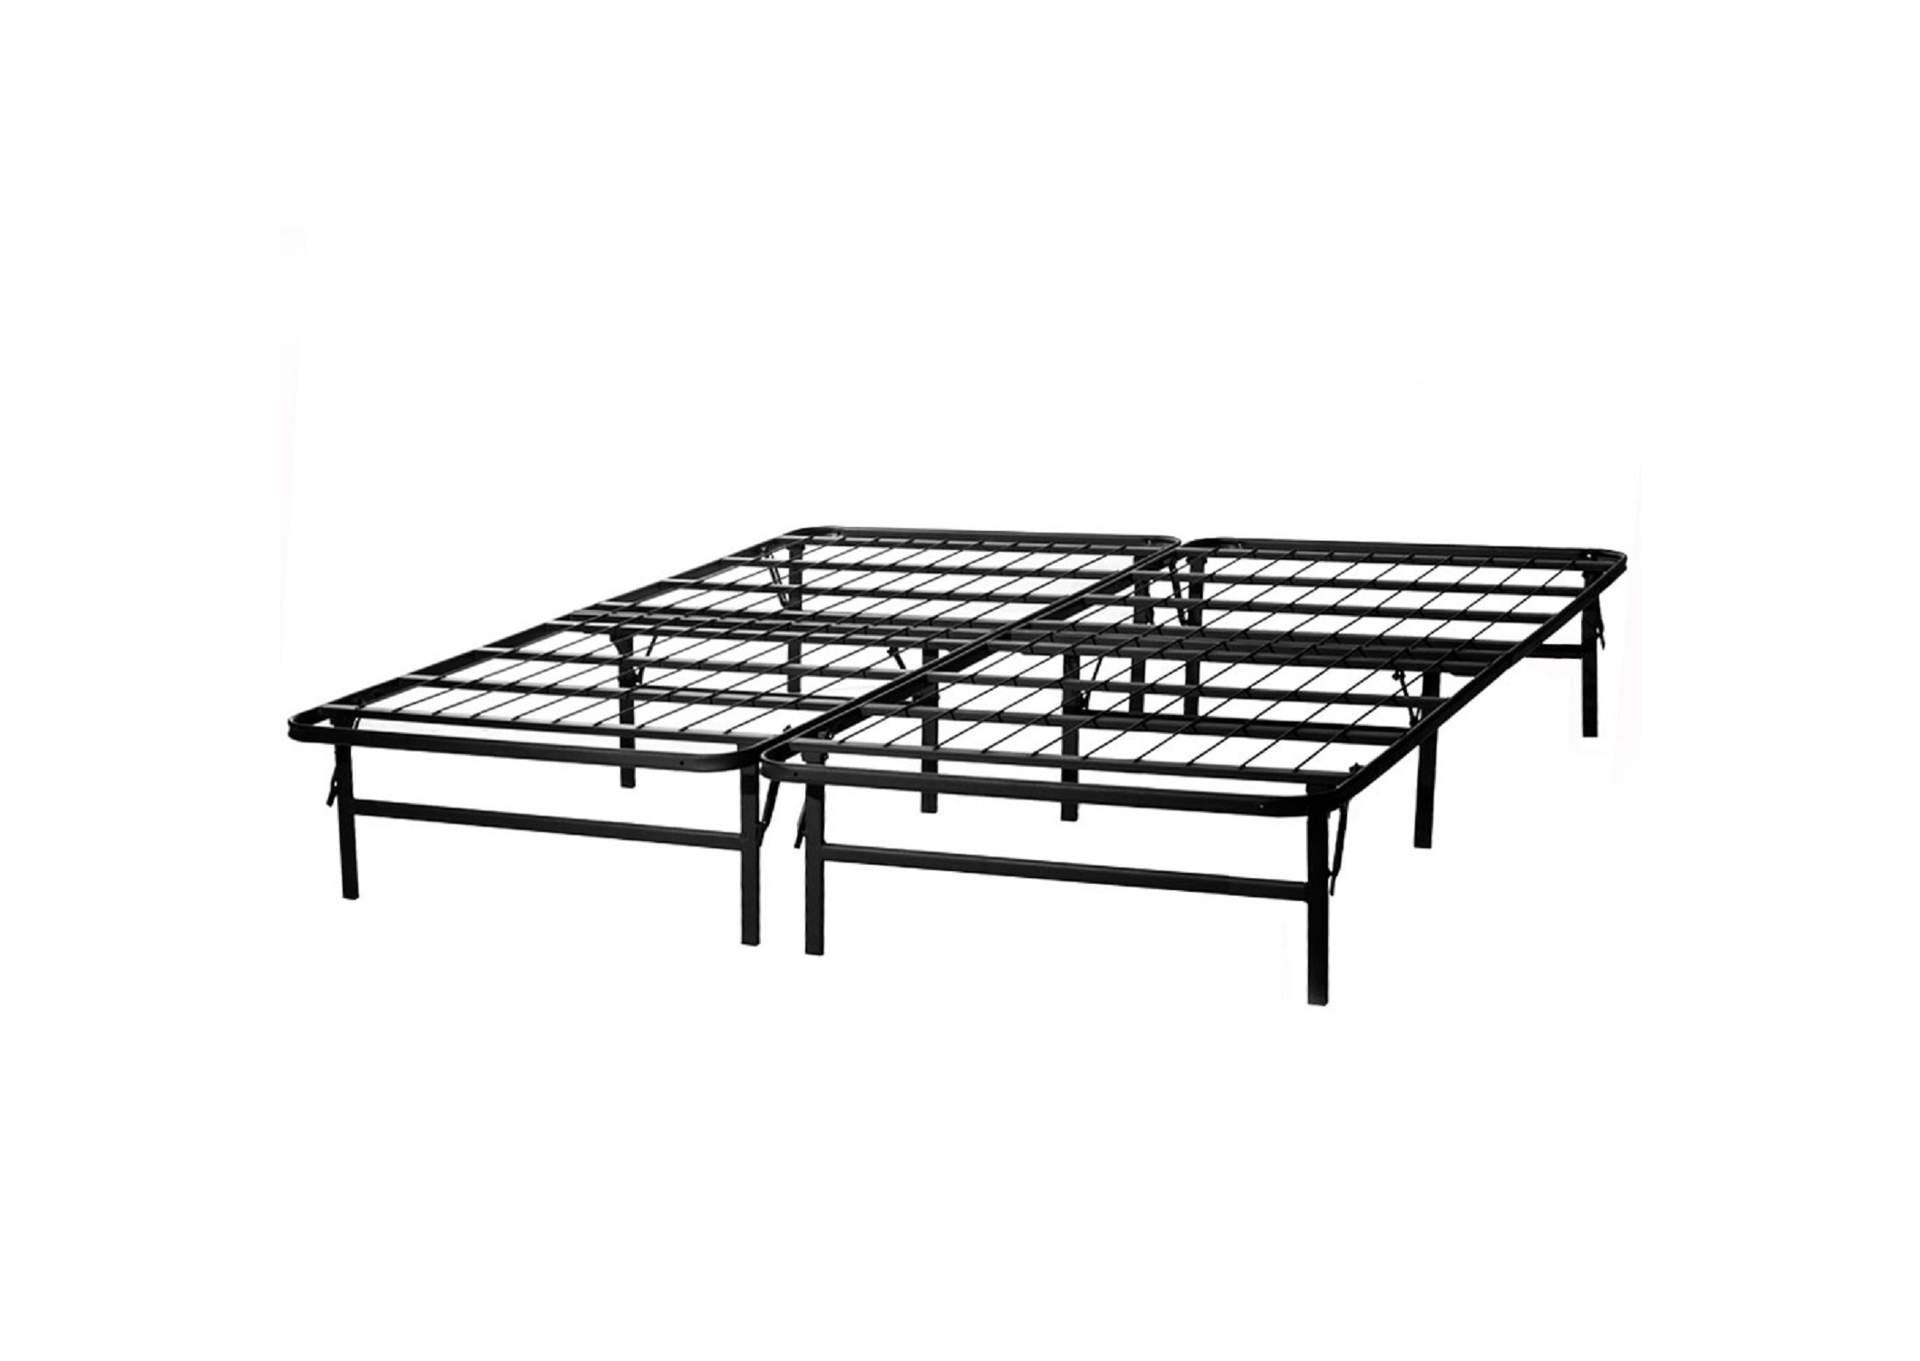 Malouf Highrise HD Frame - Queen Size,Malouf